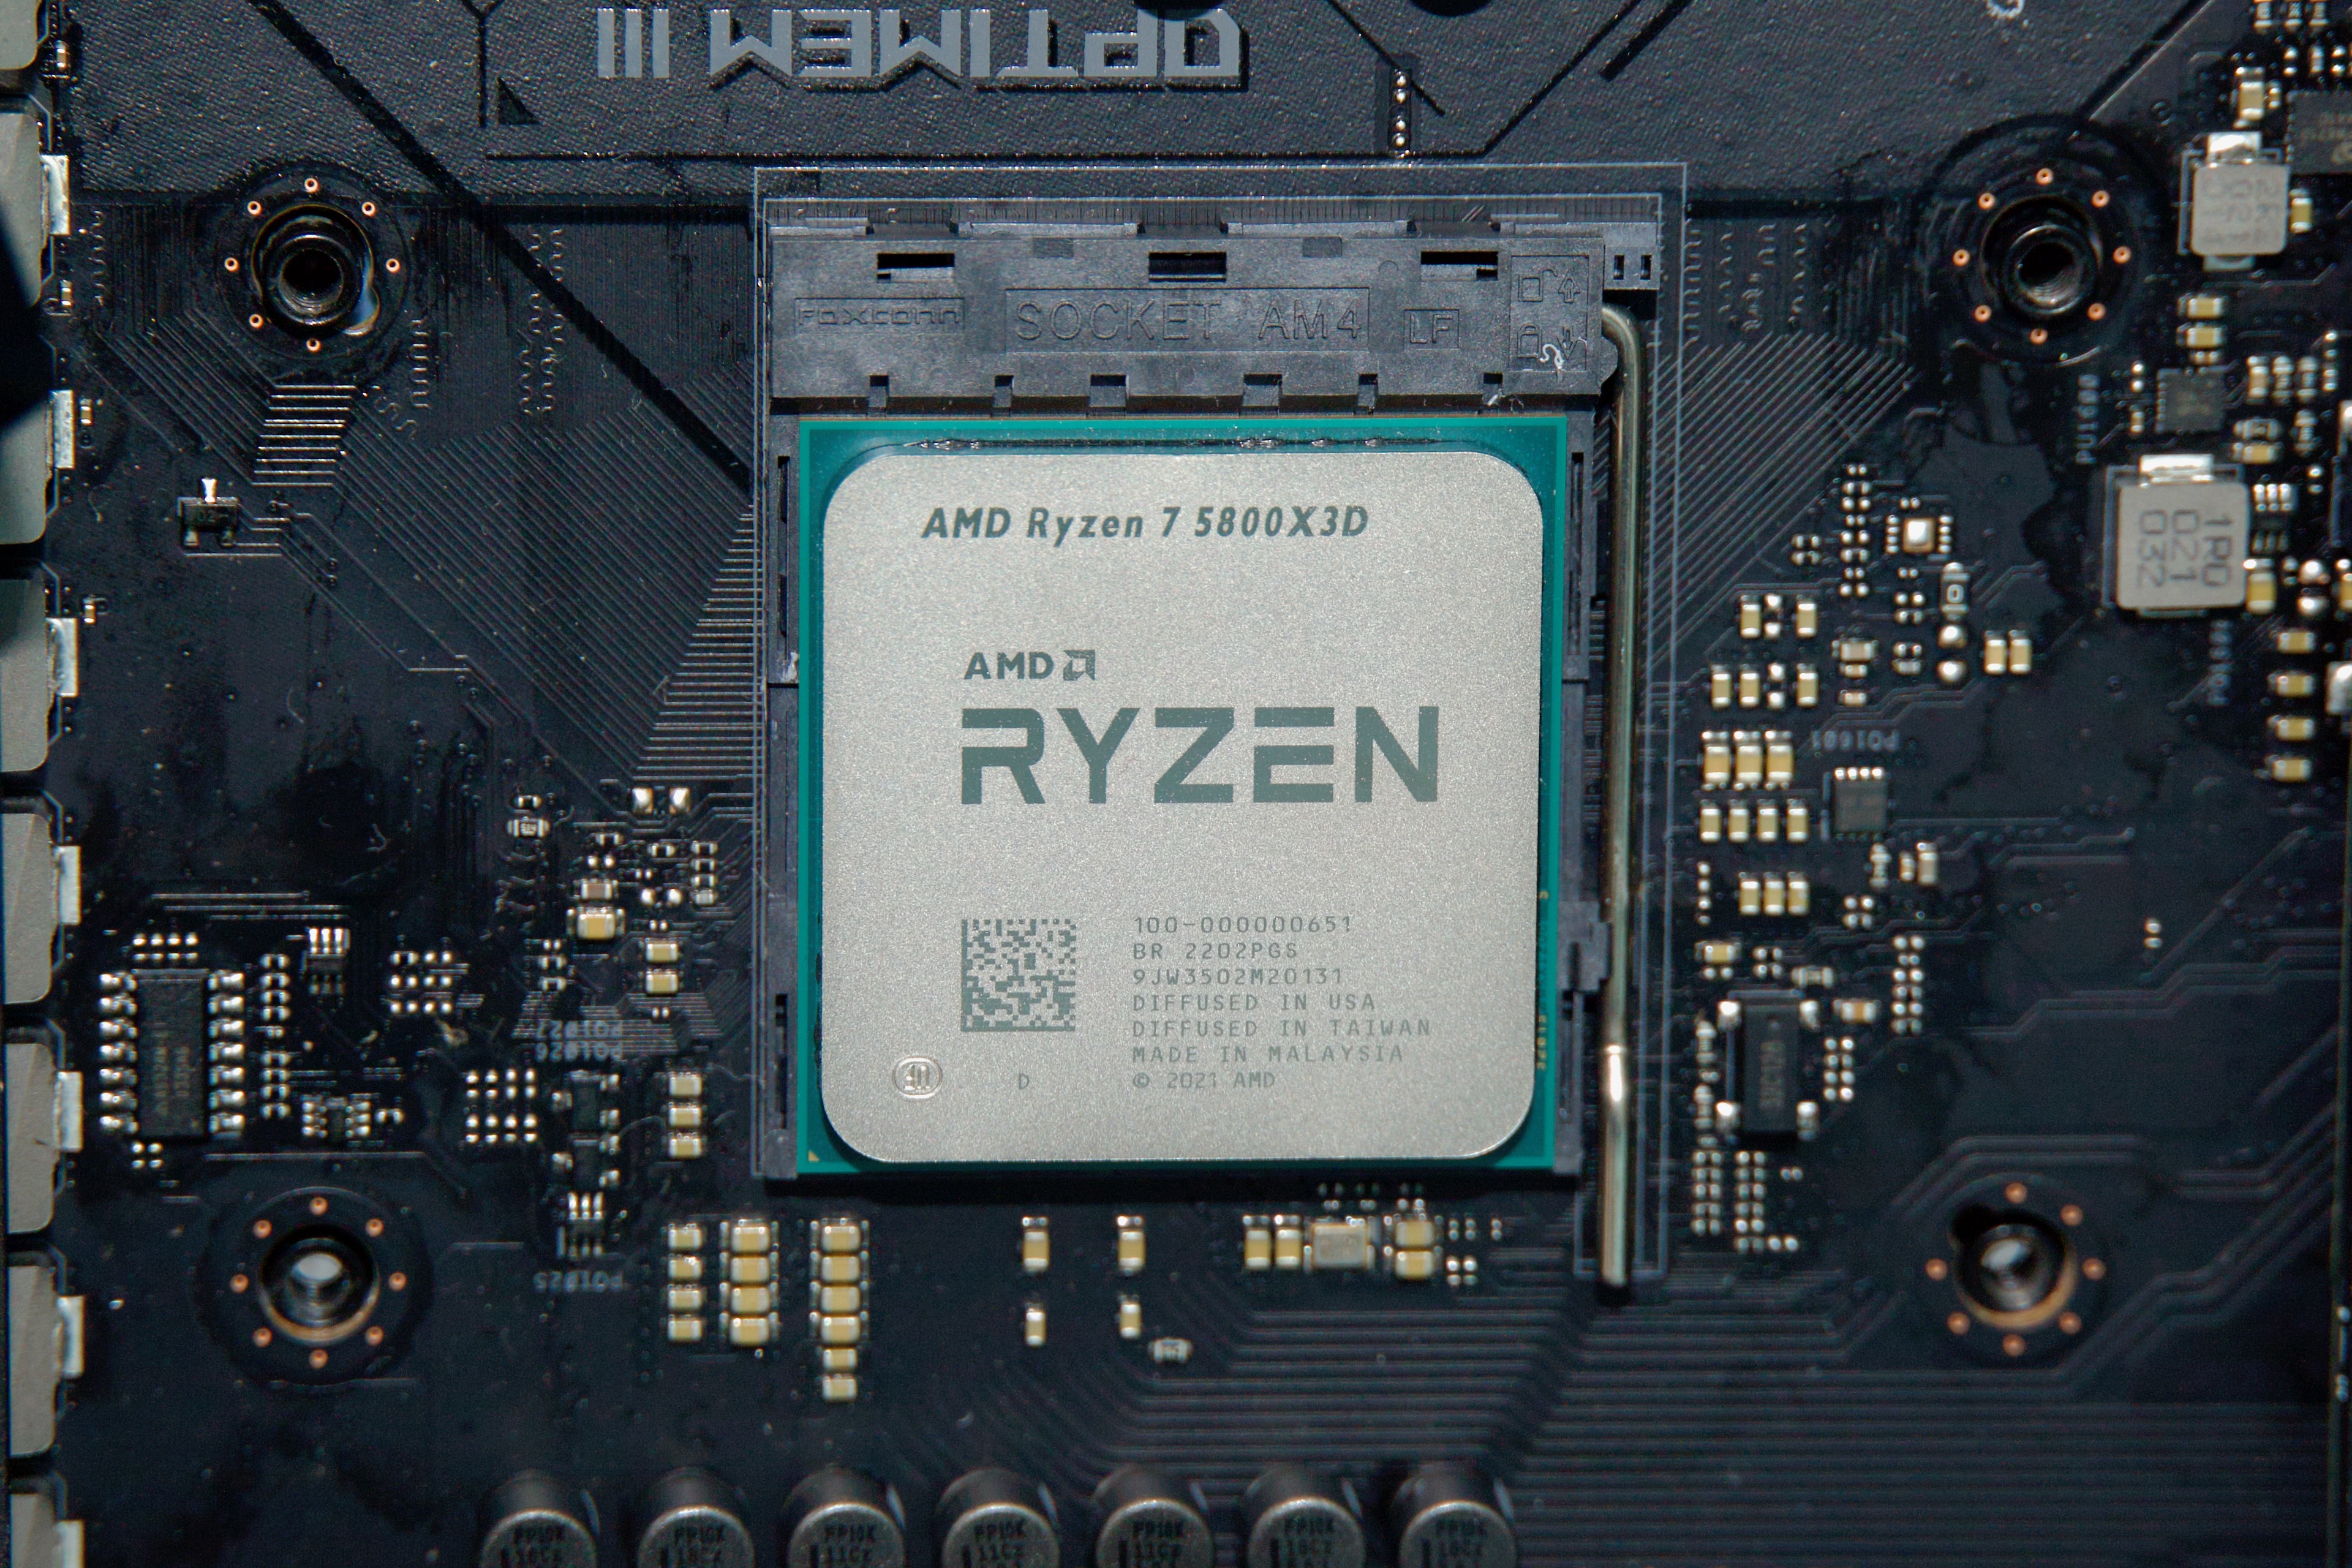 Review: Ryzen 7 5800X3D is an interesting tech demo that's hard to